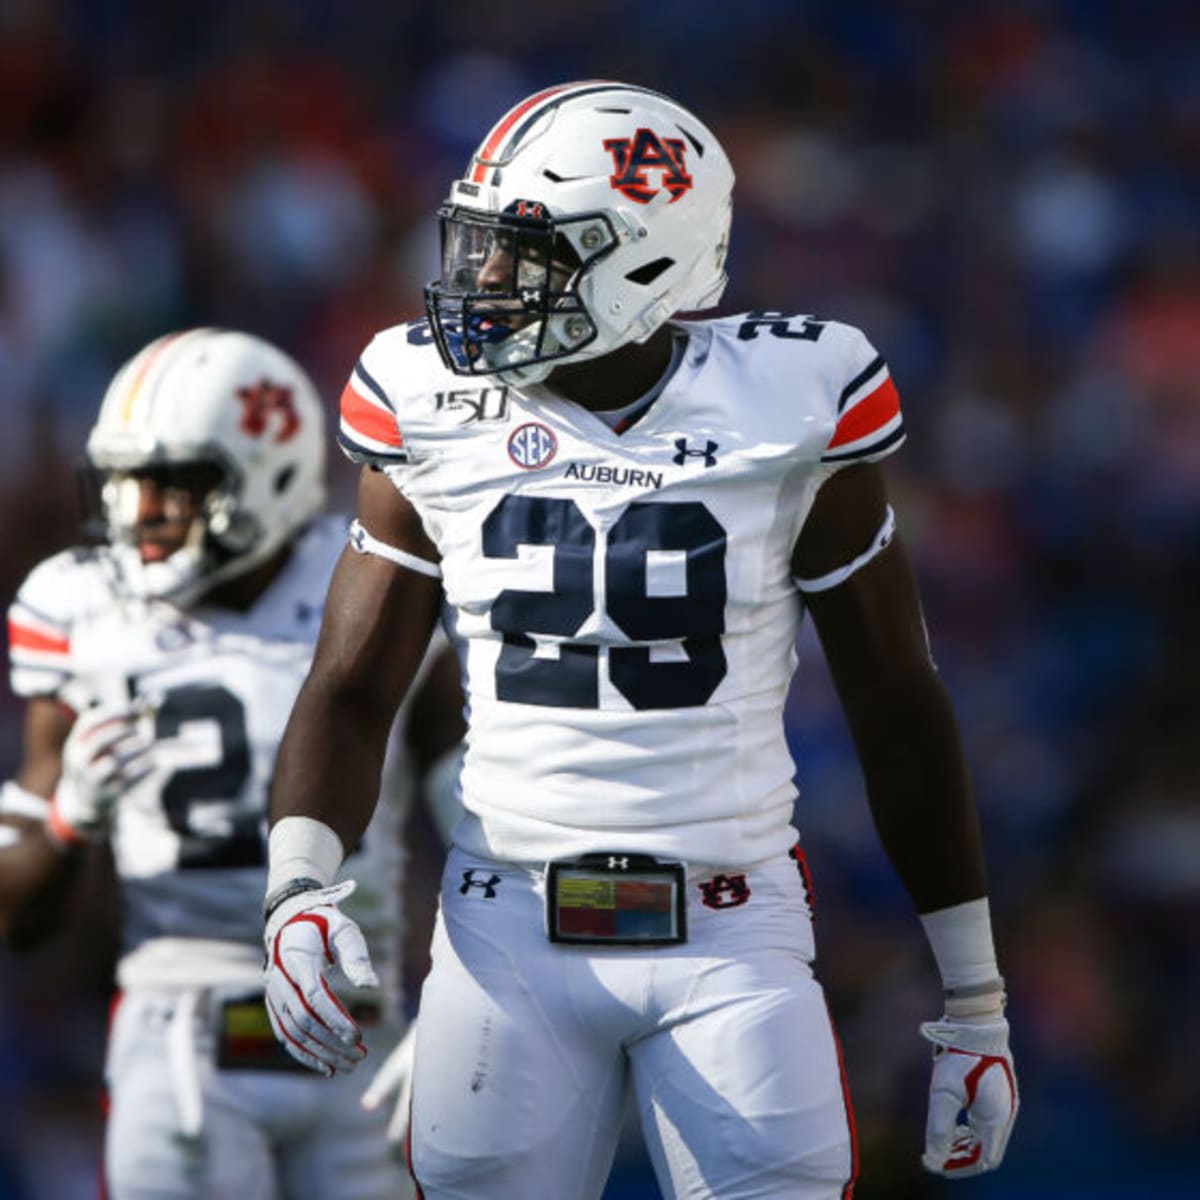 NFL Draft Profile: Derick Hall, Linebacker, Auburn Tigers - Visit NFL Draft on Sports Illustrated, the latest news coverage, with rankings for NFL Draft prospects, College Football, Dynasty and Devy Fantasy Football.